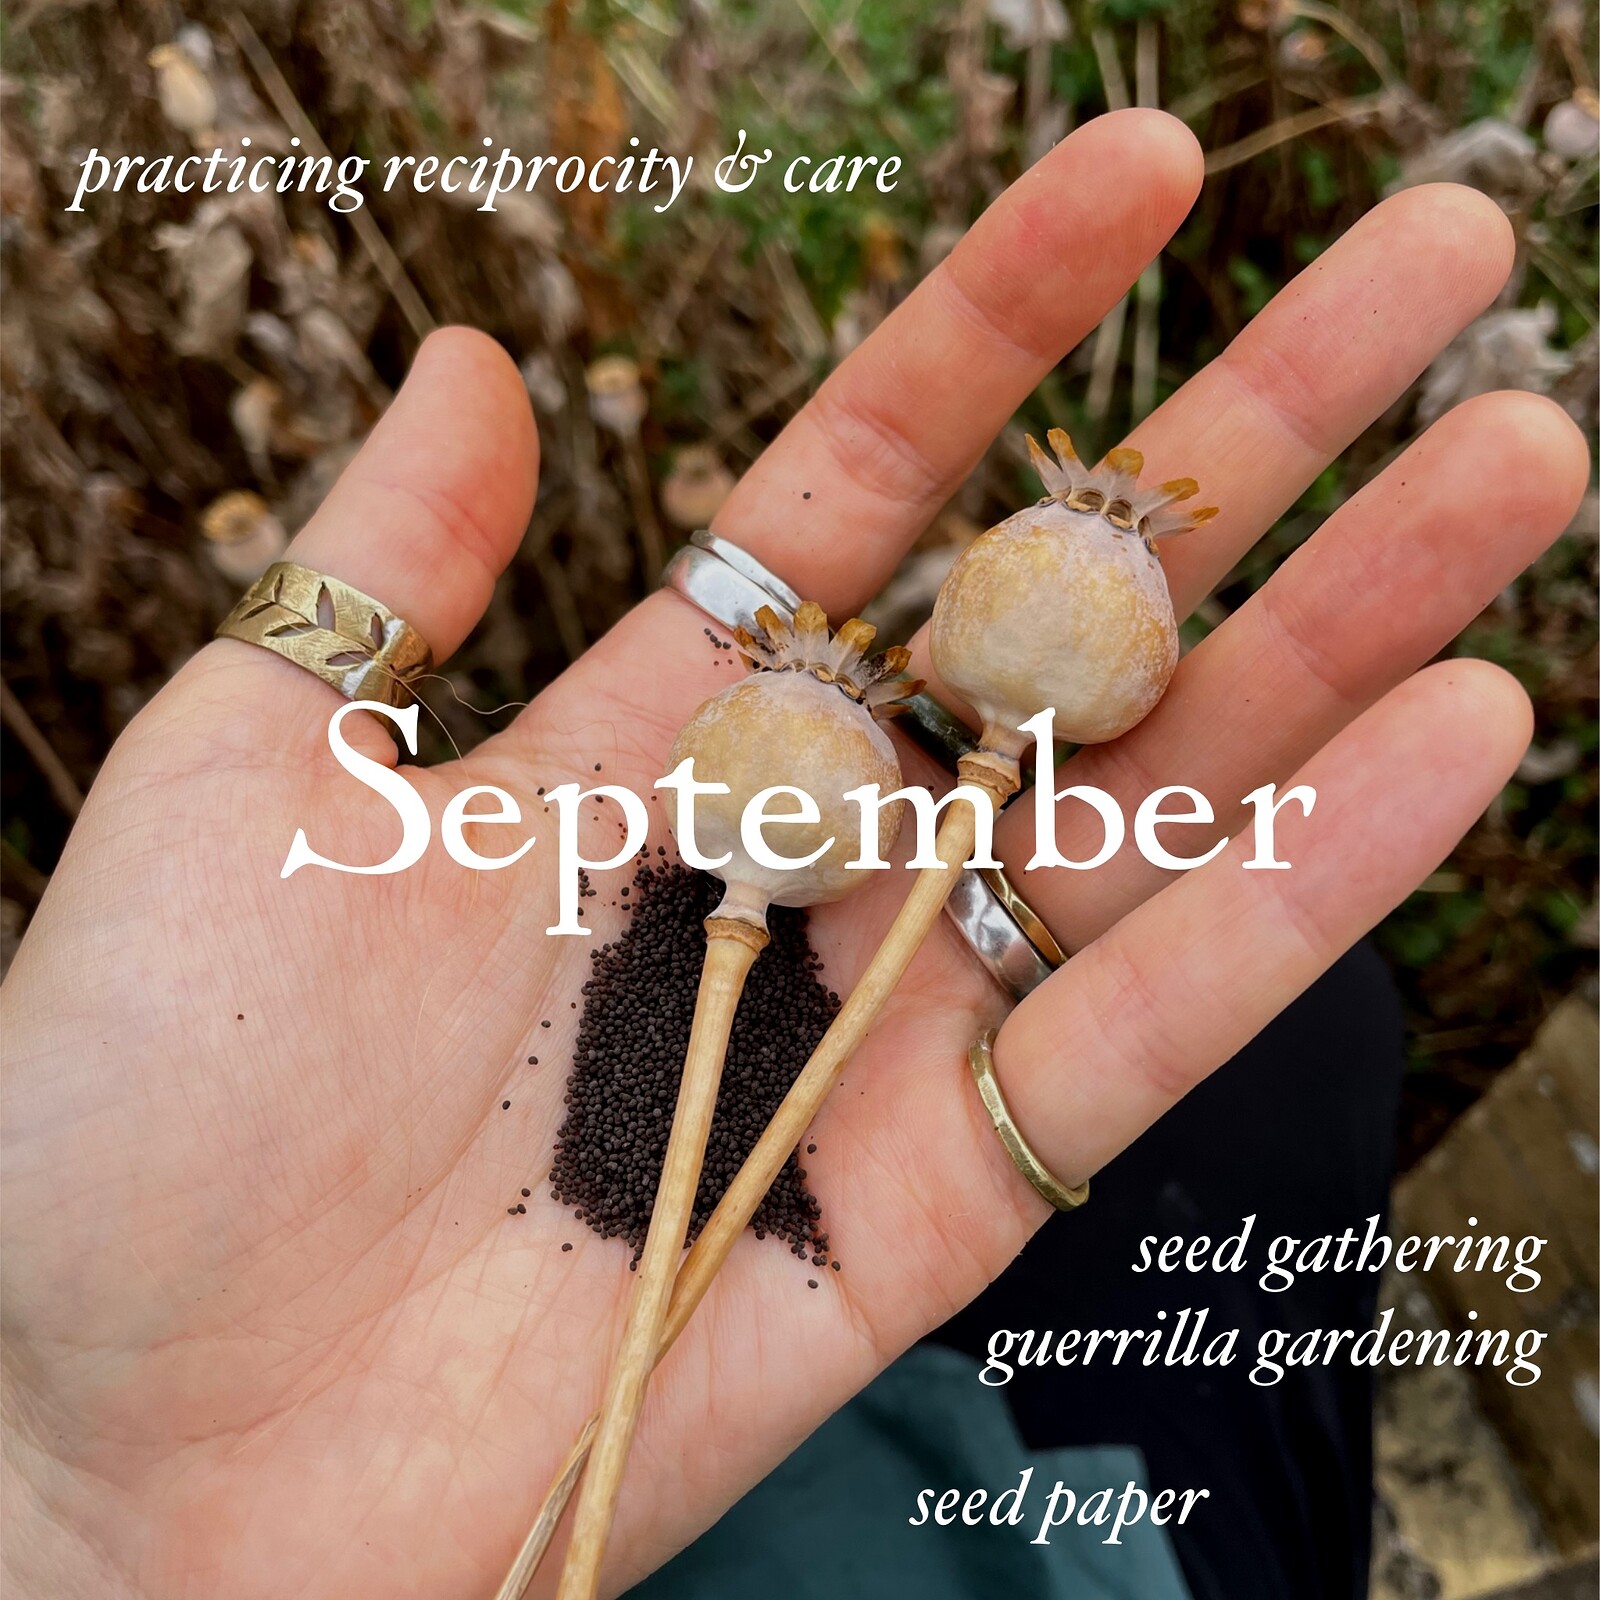 Creative Foraging - seed paper & guerrilla gardens at Conham River Park, BS15 3AW